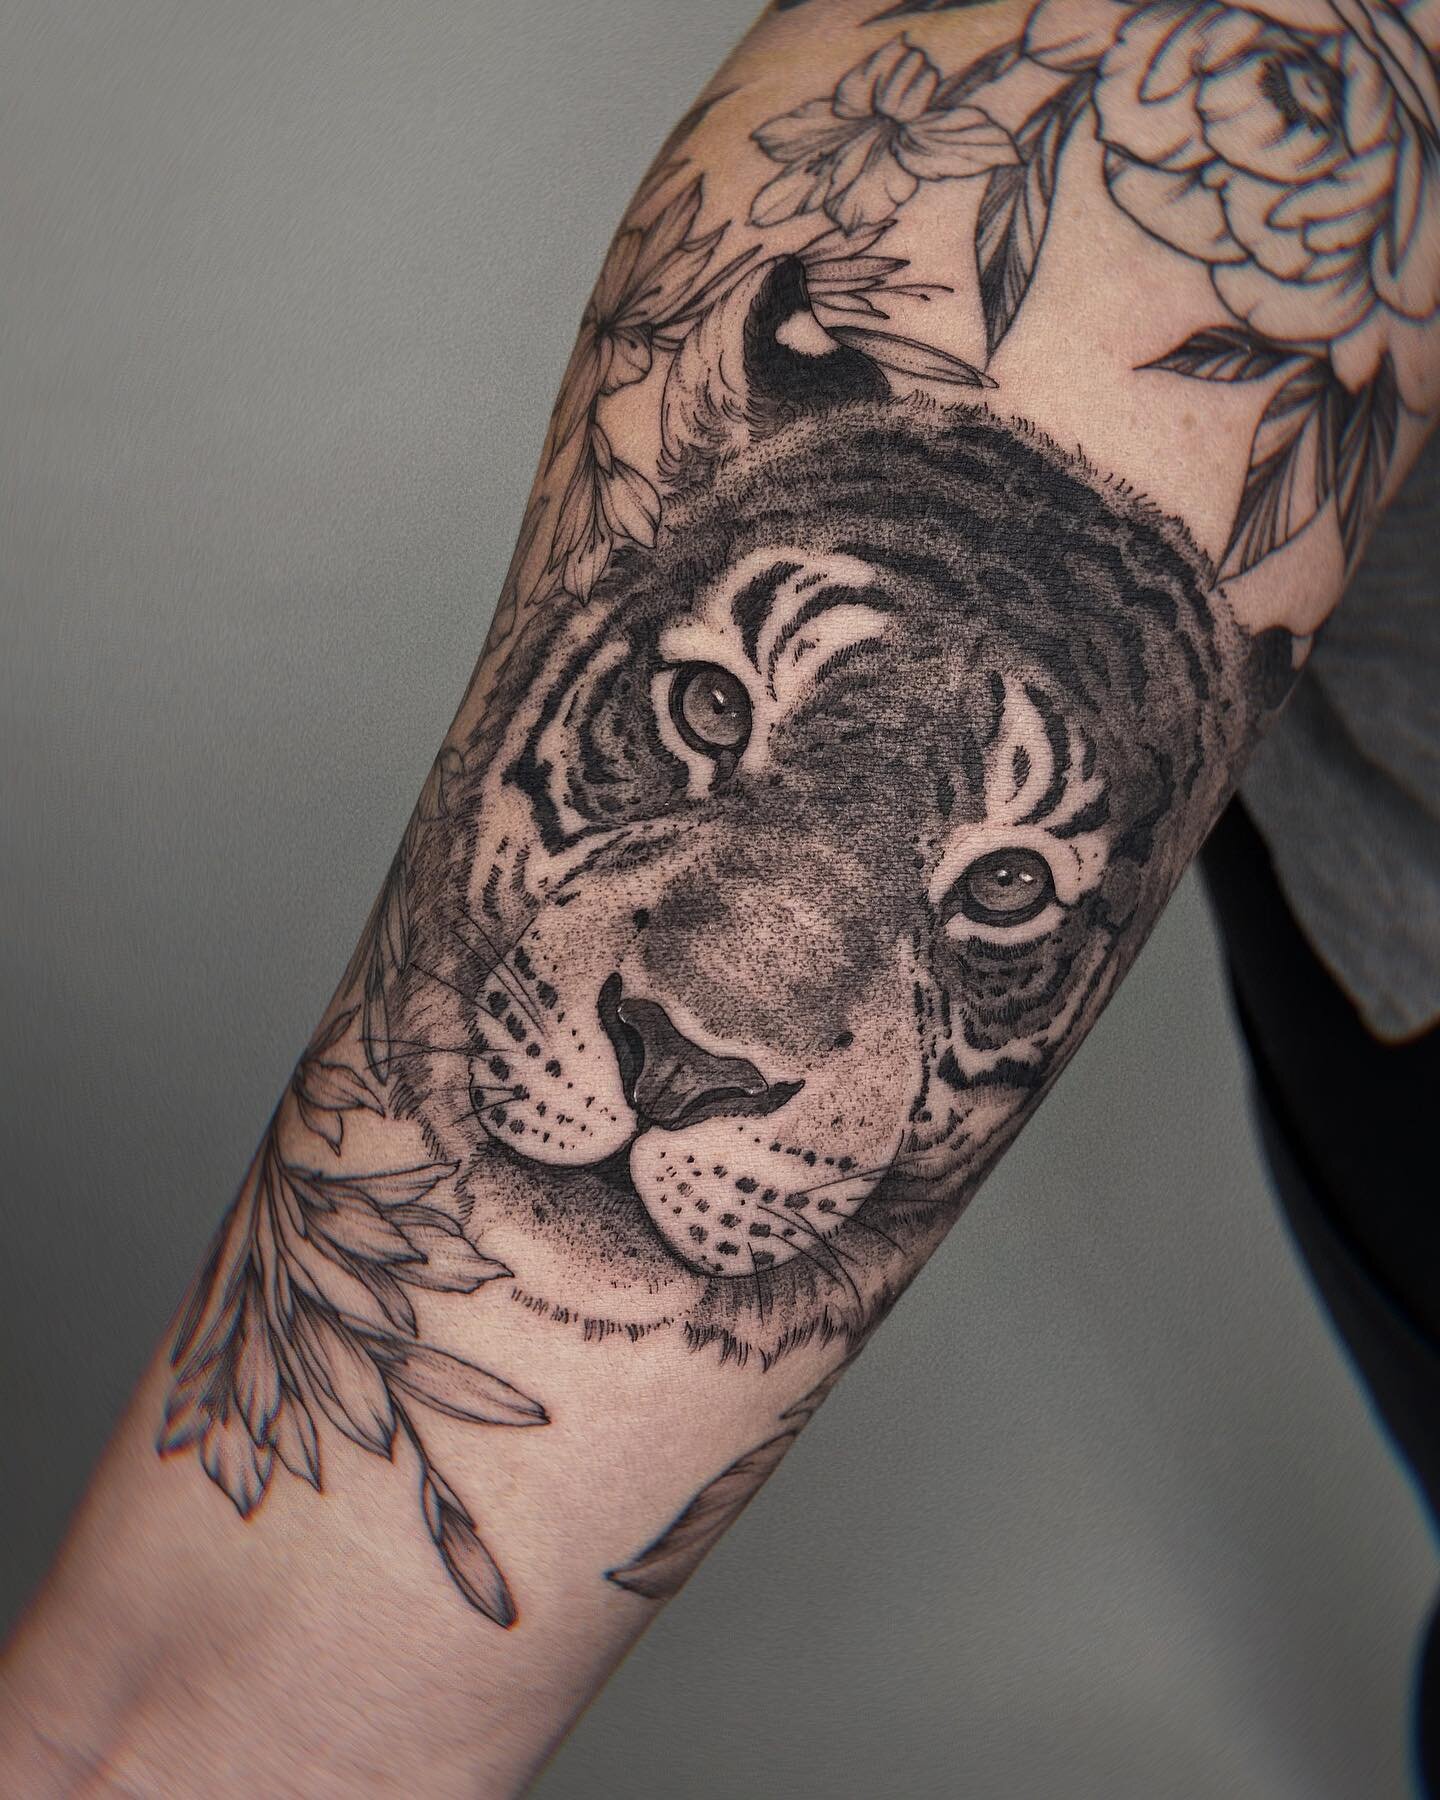 🐯 Newest addition to a floral sleeve 🐯